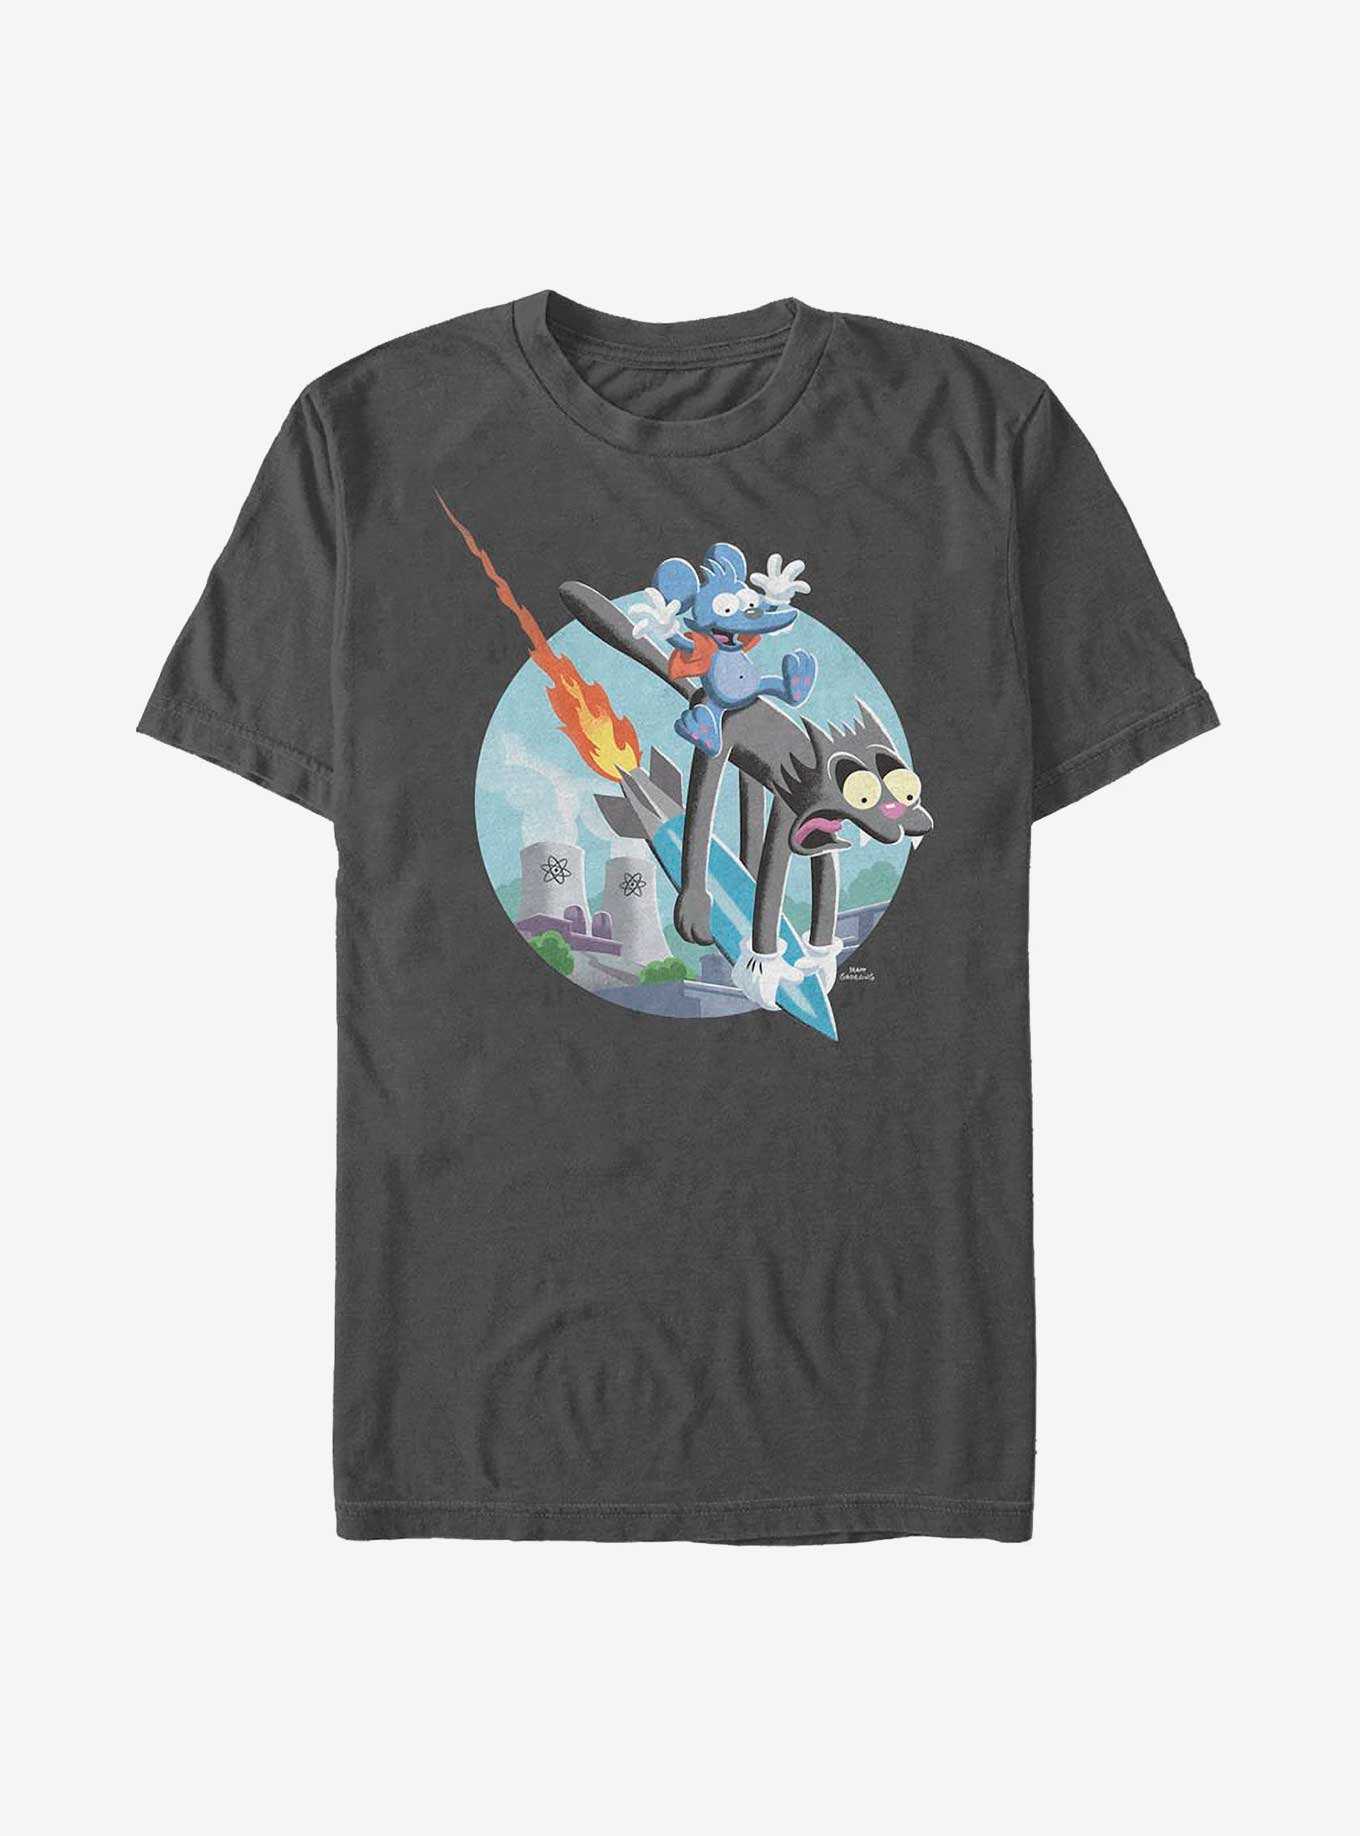 The Simpsons Itchy Scratchy Ride Missile T-Shirt, , hi-res